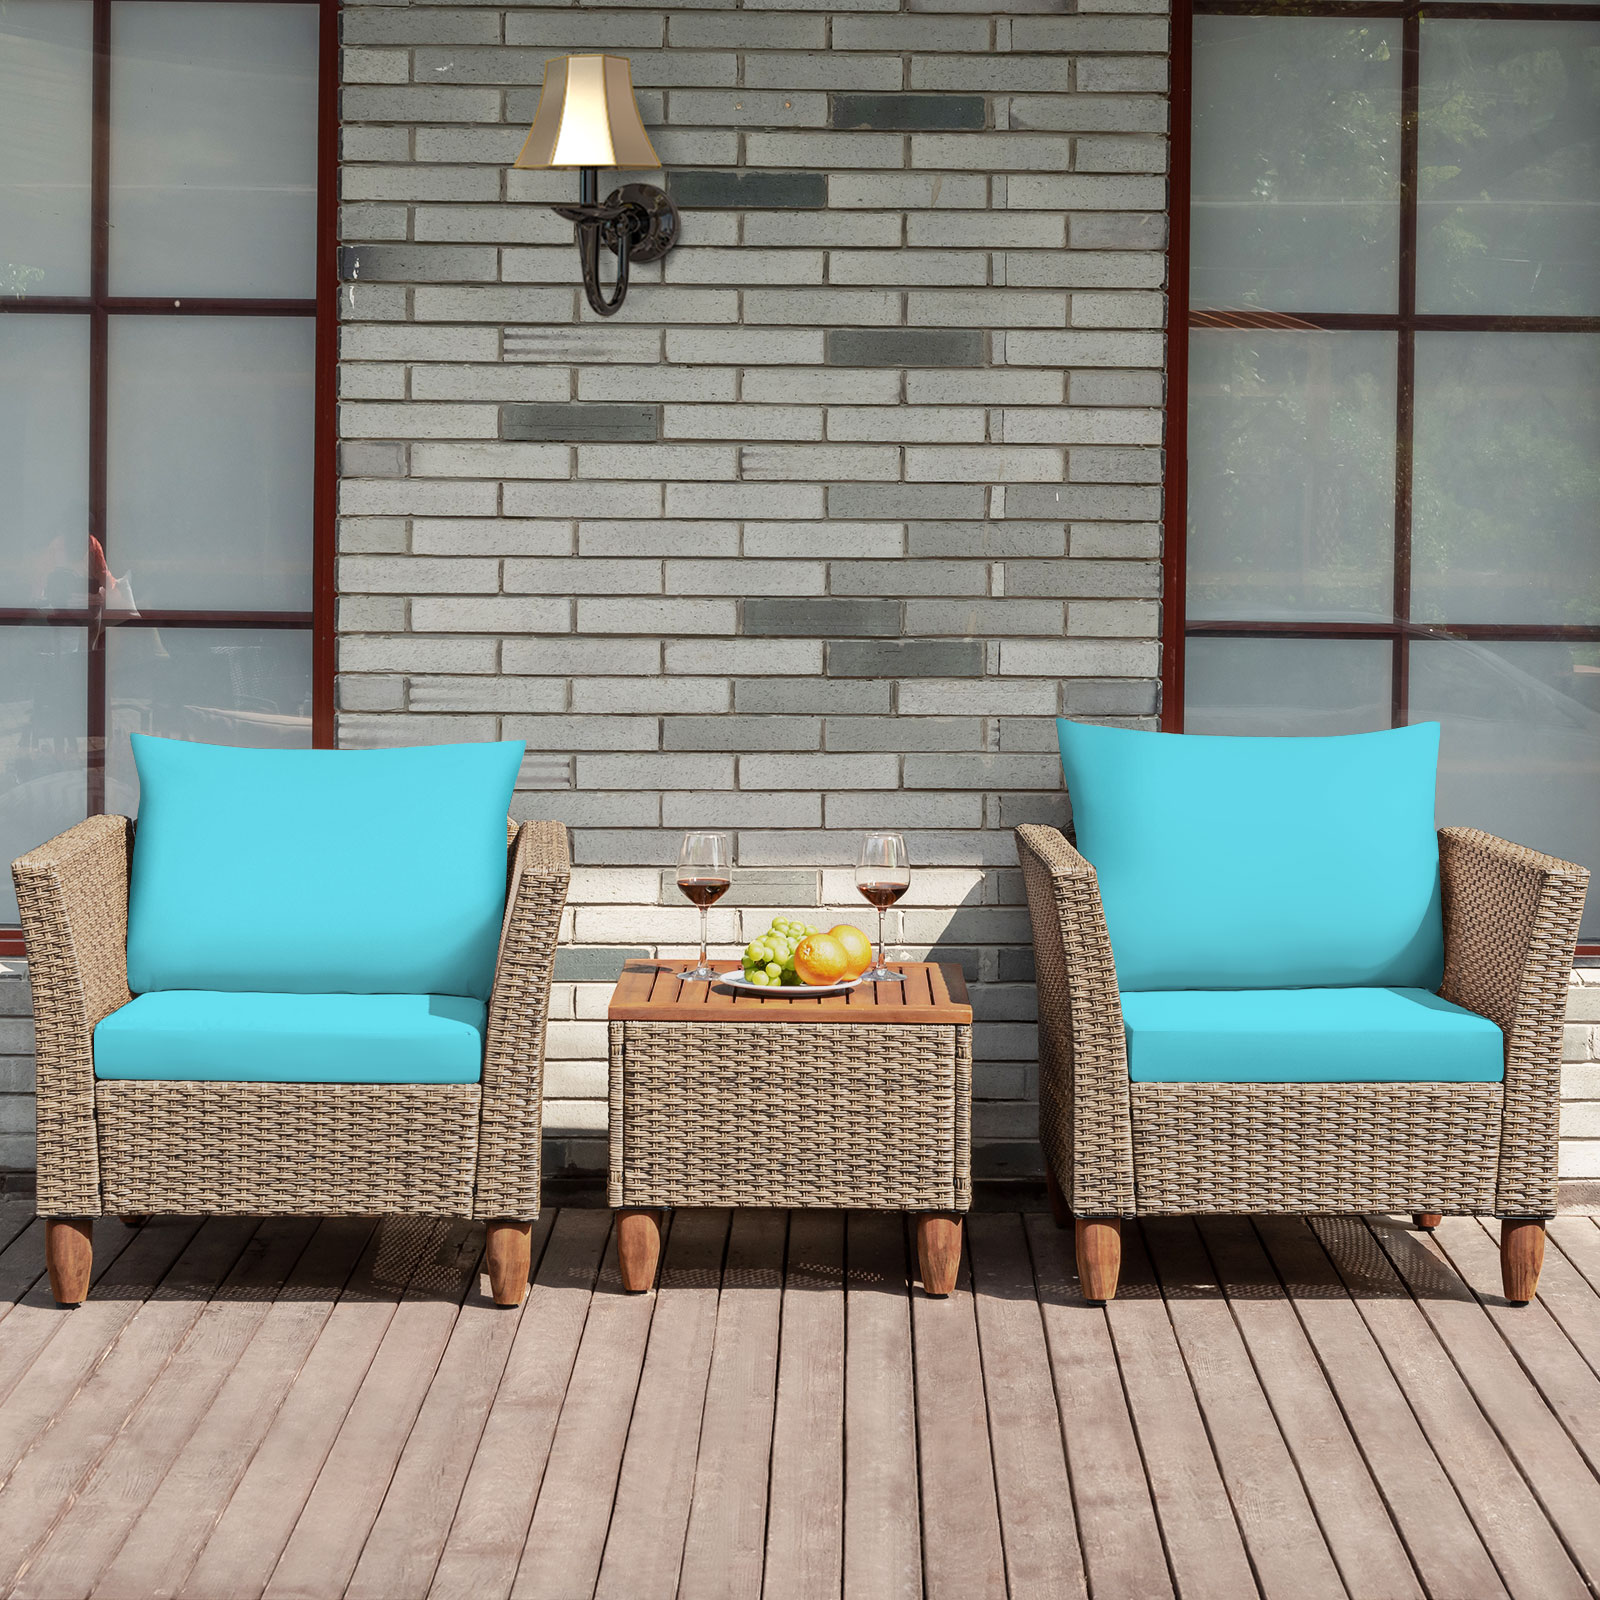 Patiojoy 3 Piece Outdoor Rattan Sofa Set Wicker Conversation Furniture Set with Turquoise Cushions - image 3 of 9